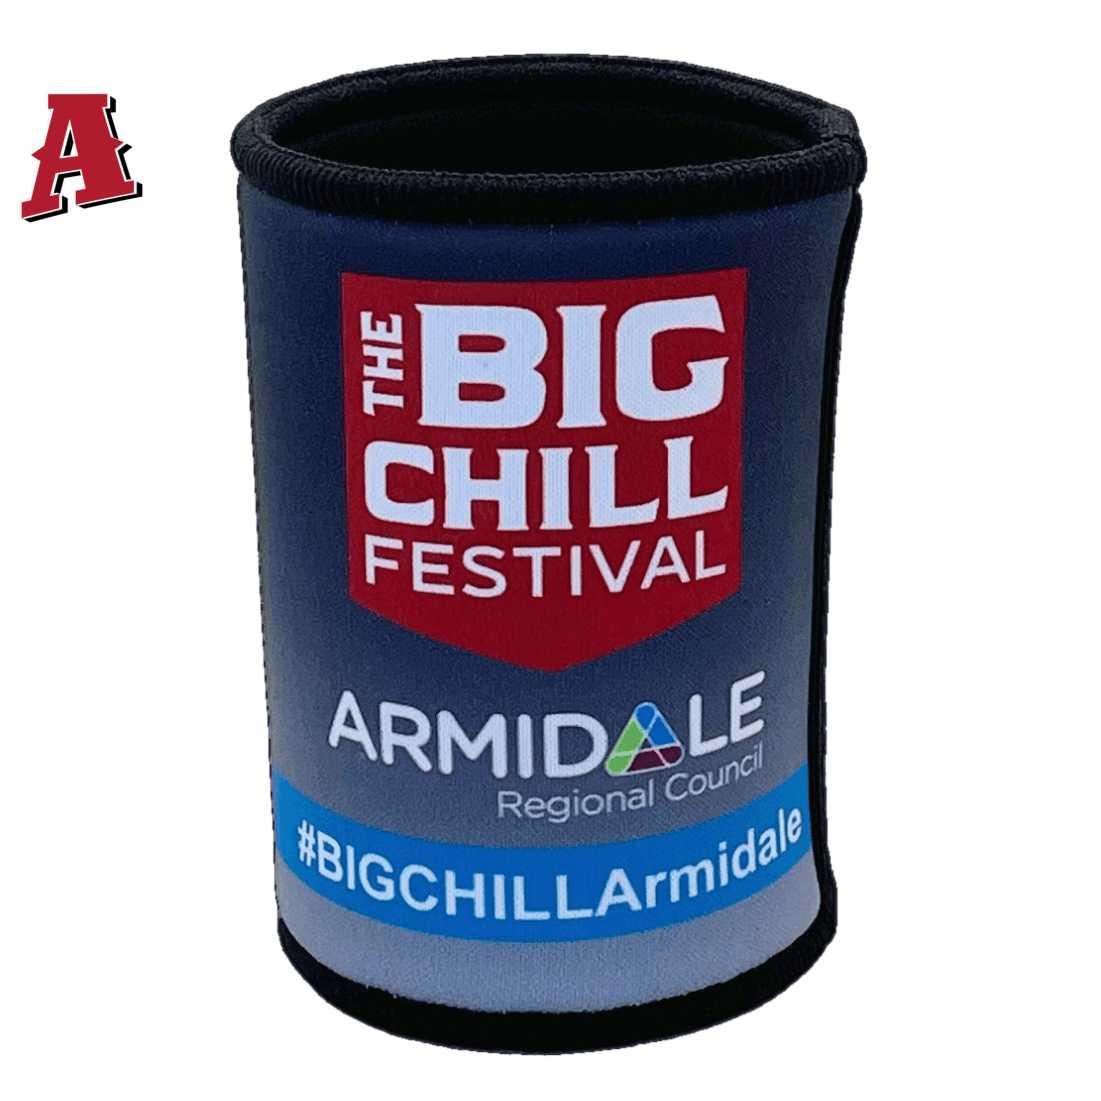 The Big Chill Festival Armidale NSW Aussie Custom Stubby Holder Koozie 5mm Premium Neoprene with Tapped Stitched Seams Gradient Greys